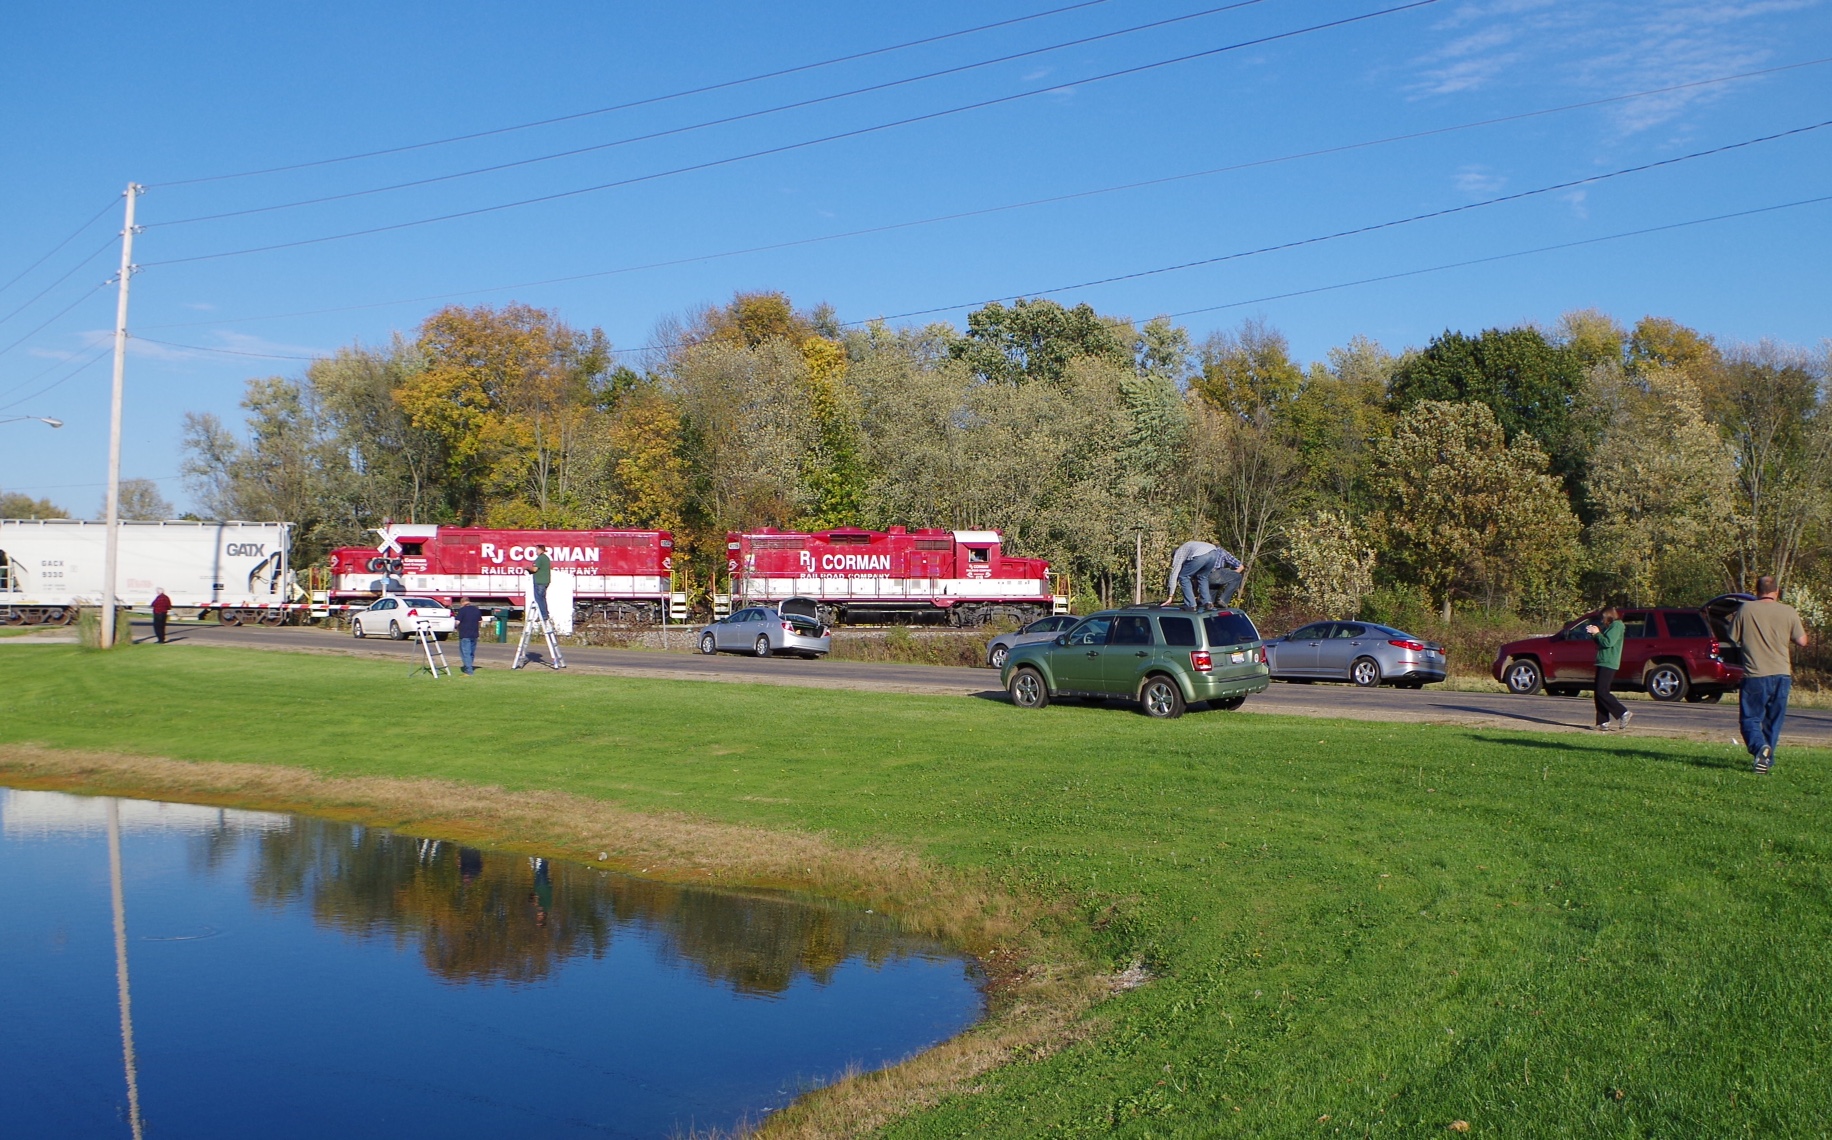 It must have been a slow day as the railfan chase crew was out in force. I see Bob Farkas at left near the train.